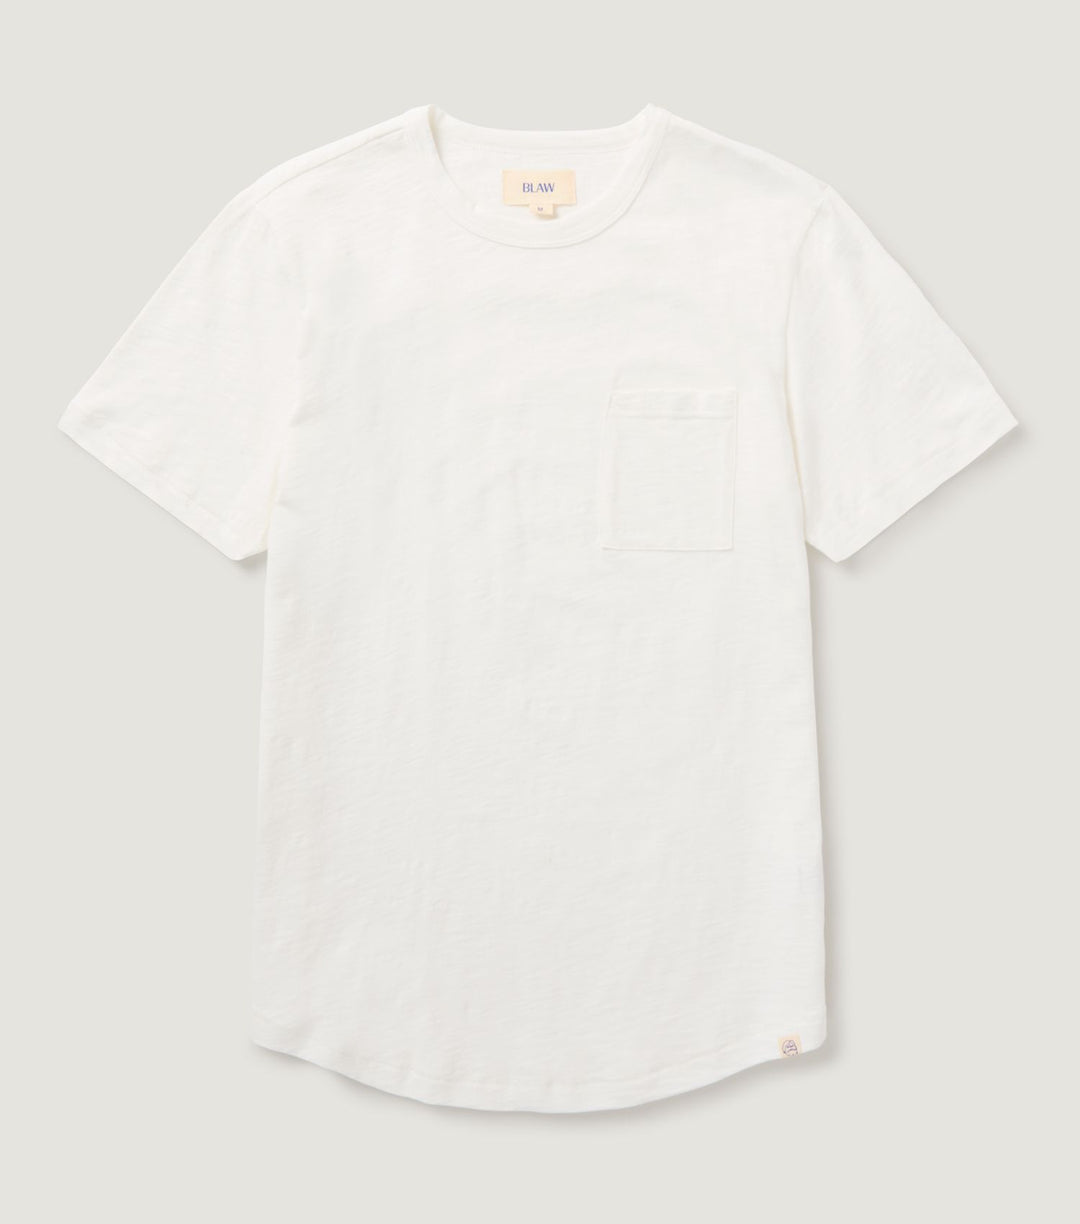 Basic Flame T-shirt with Pocket White - BLAW